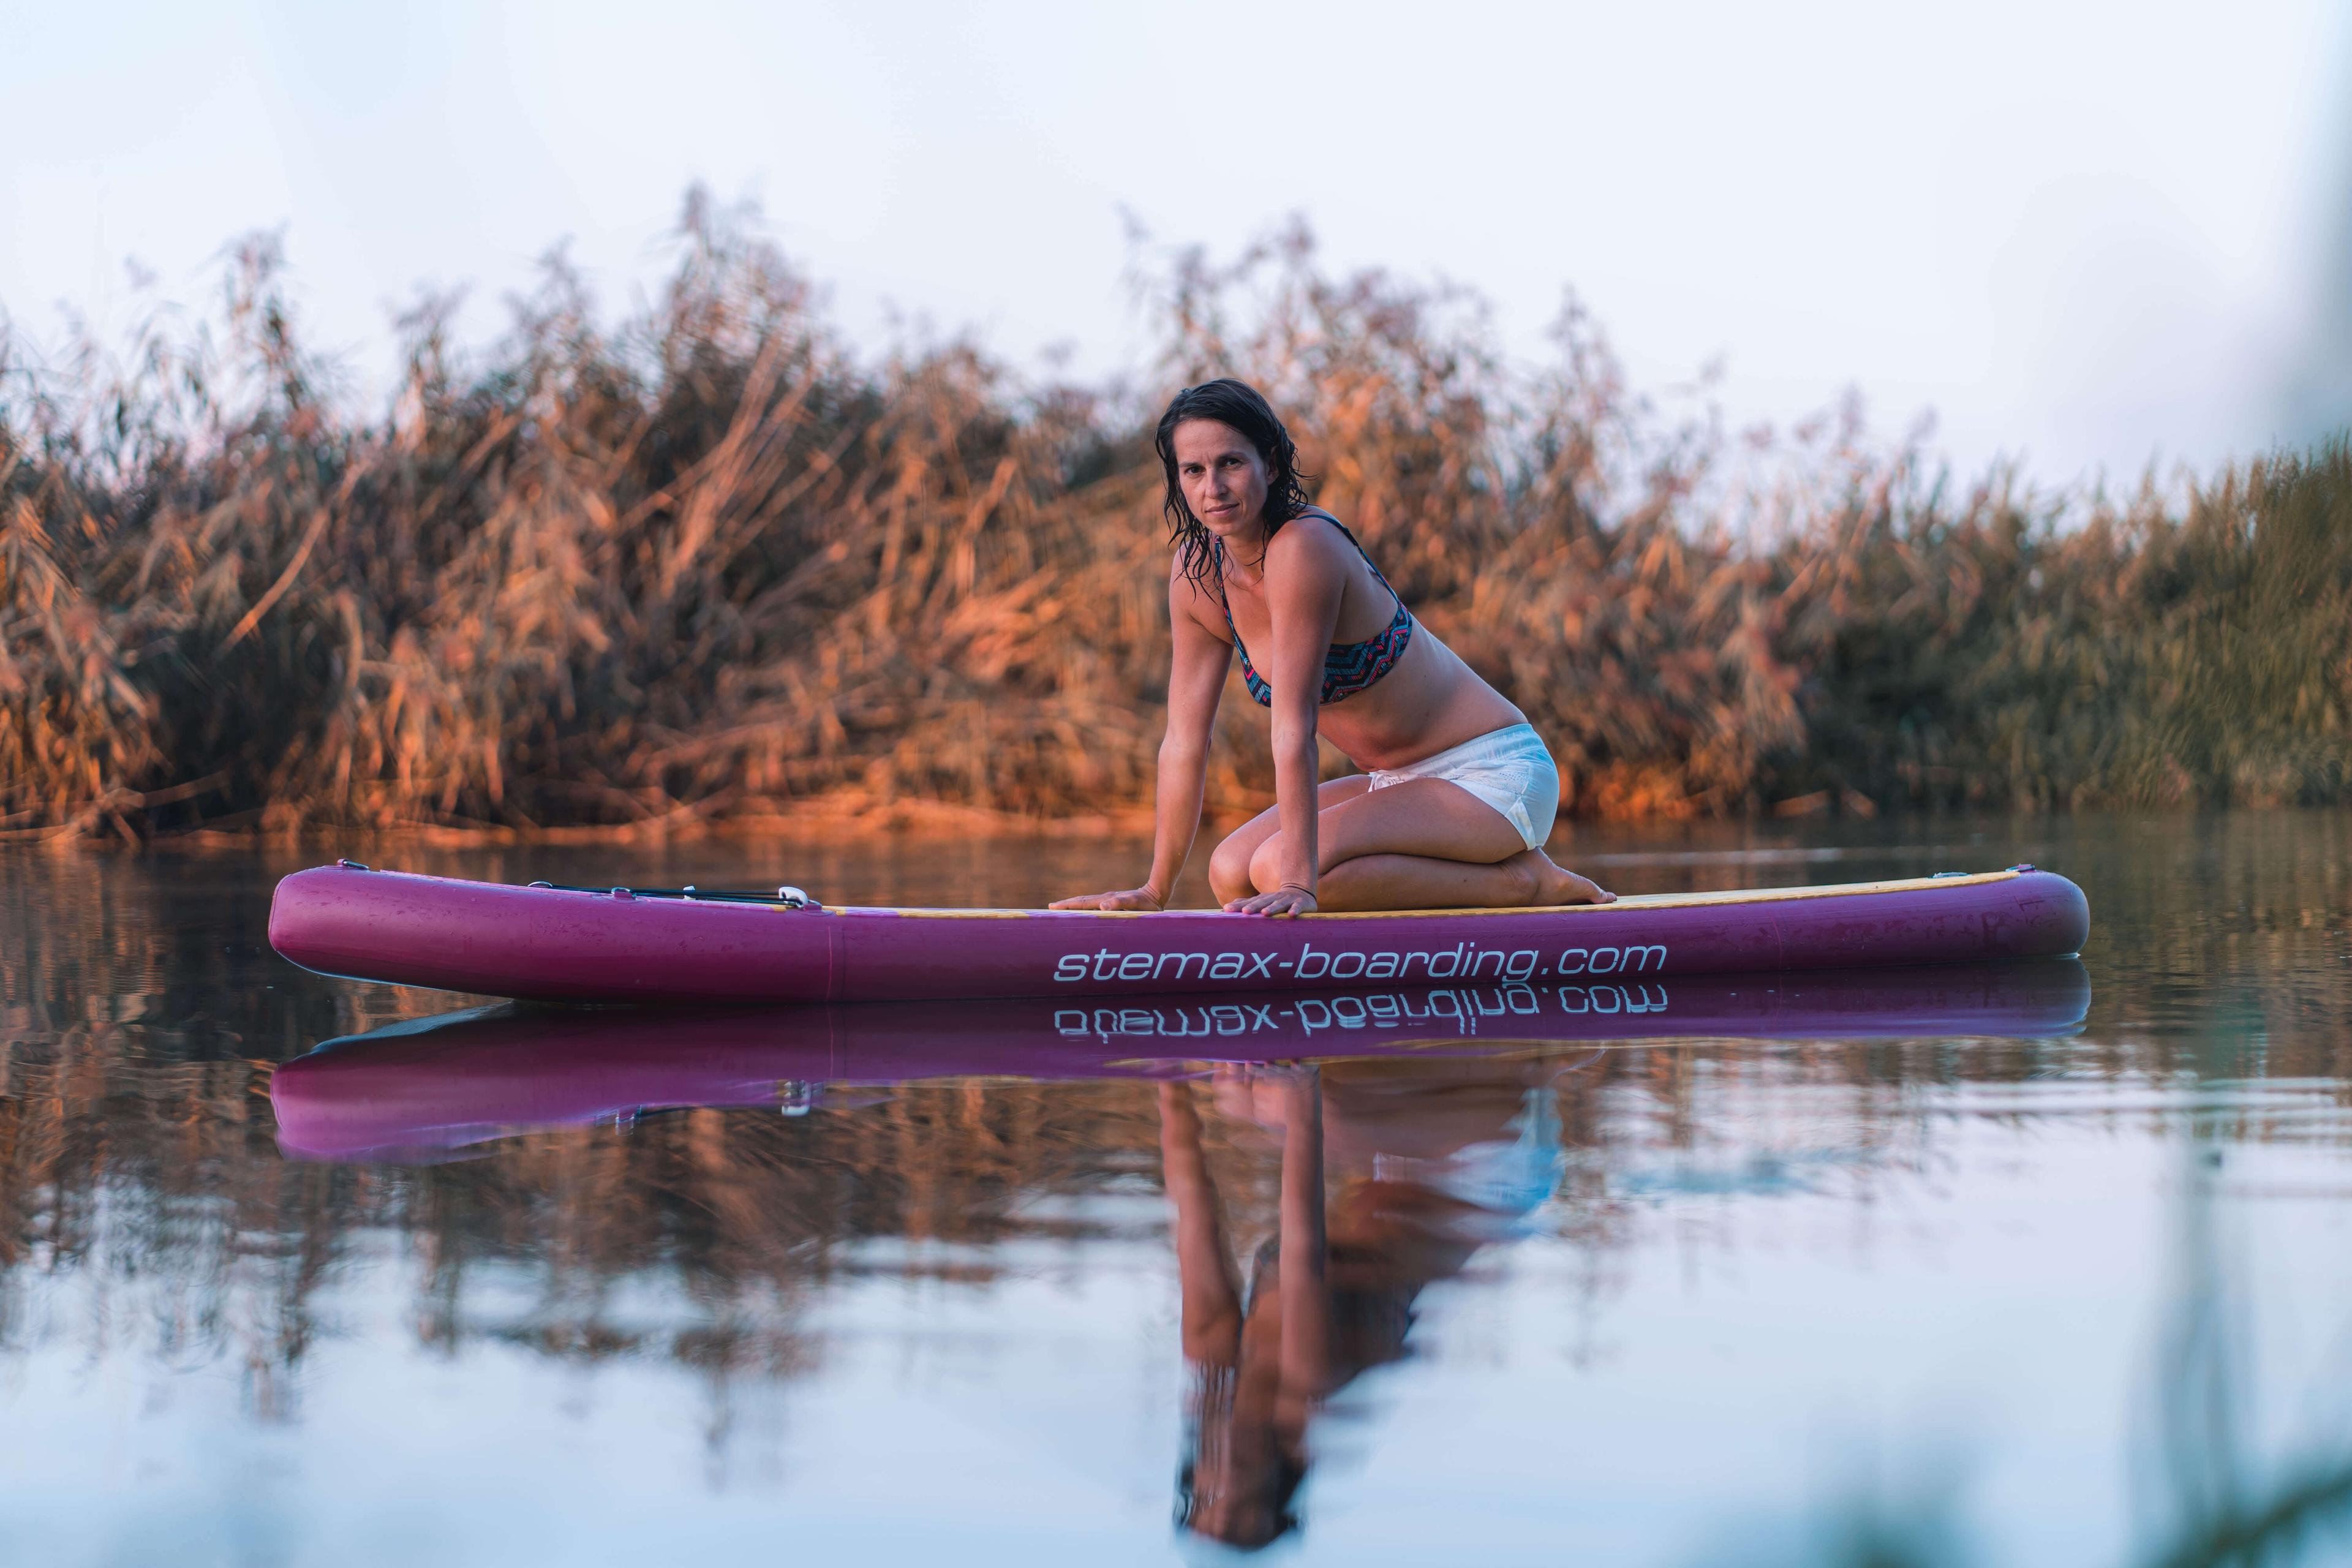 Stemax Boarding | Woman Kneeing on SUP in the Water